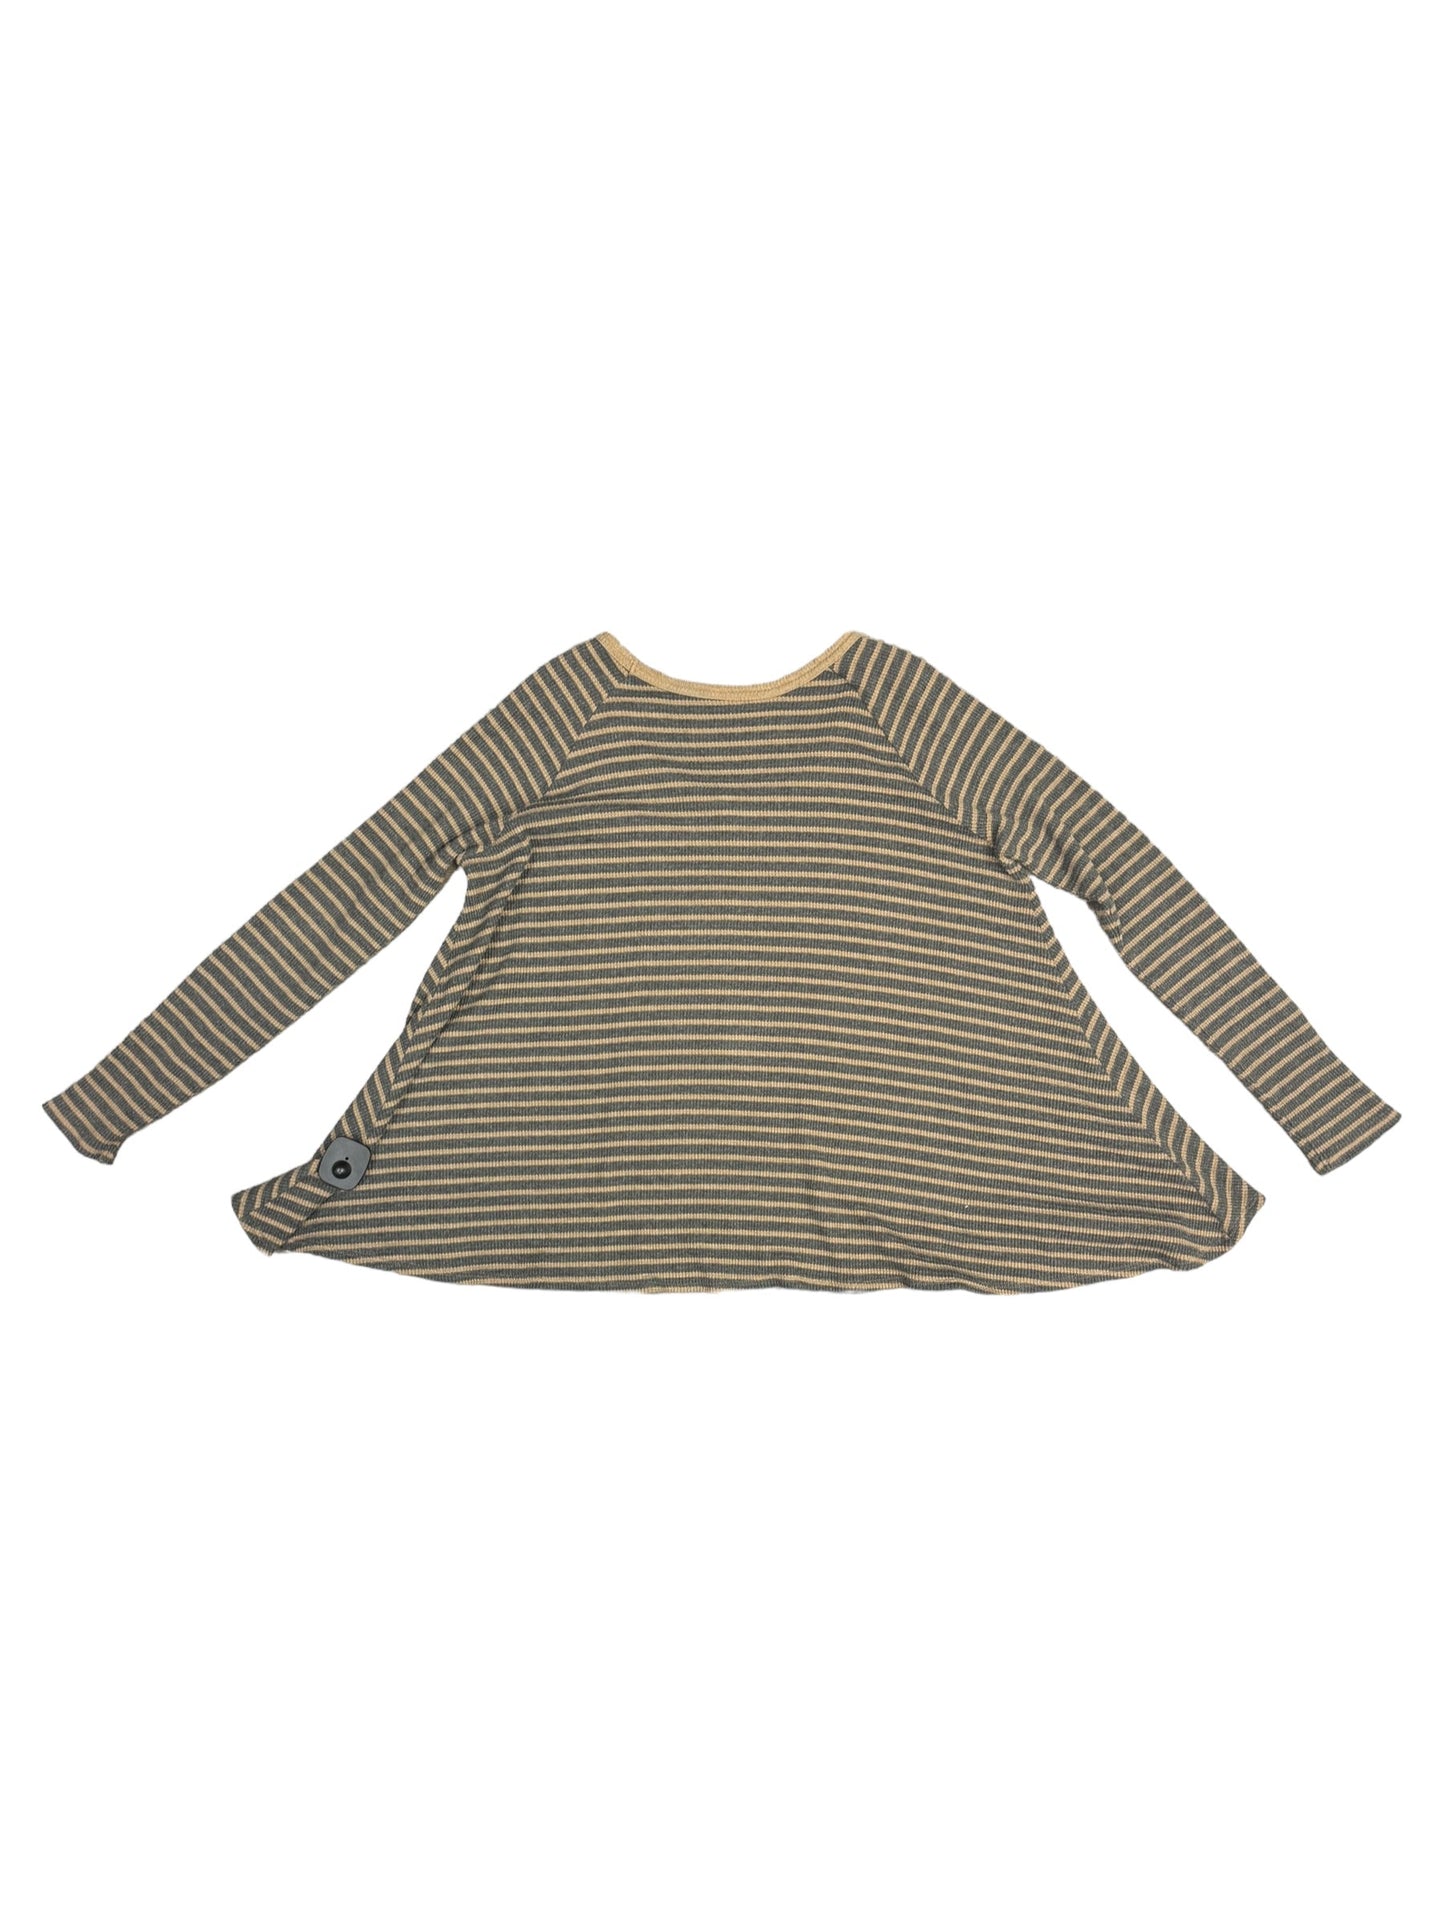 Grey & Tan Top Long Sleeve We The Free, Size L